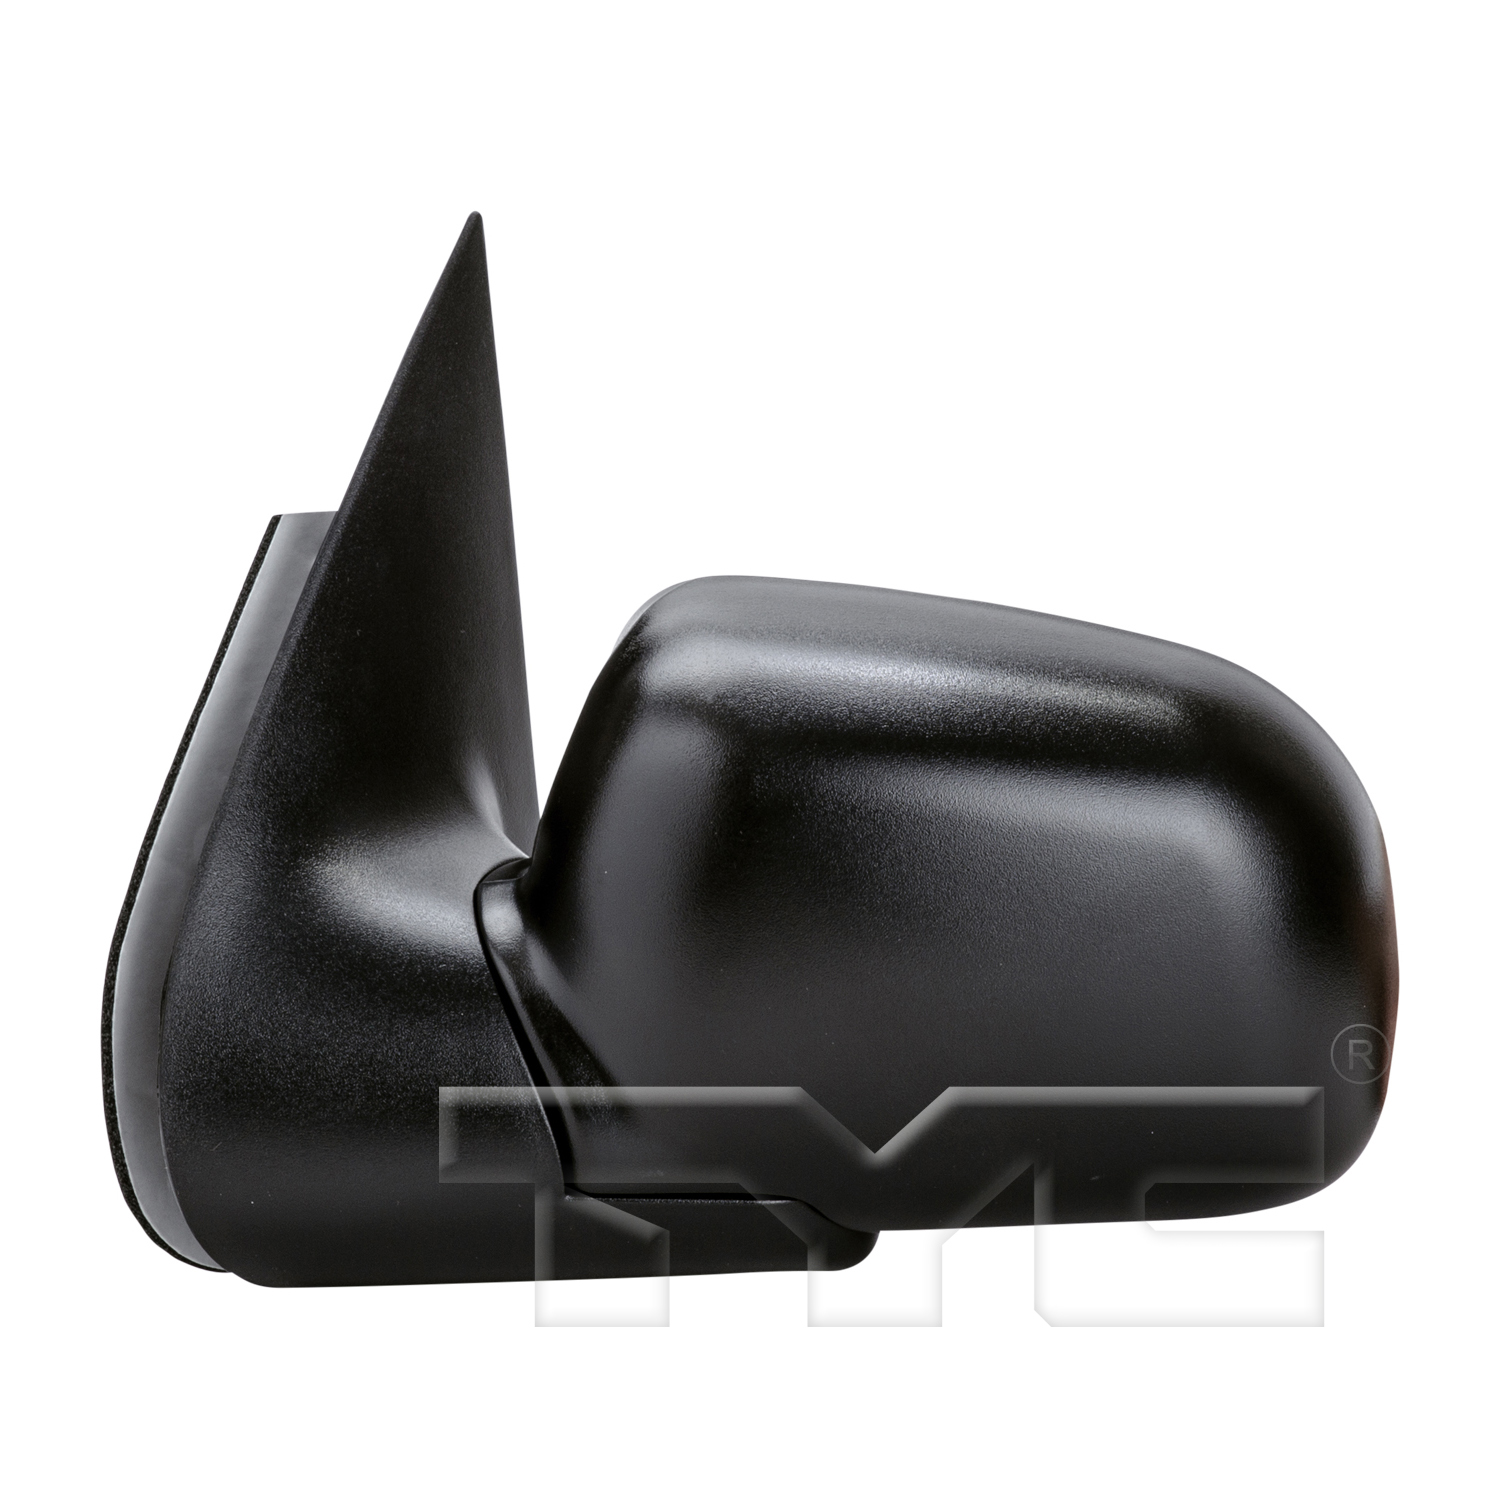 Aftermarket MIRRORS for MERCURY - MOUNTAINEER, MOUNTAINEER,02-05,LT Mirror outside rear view